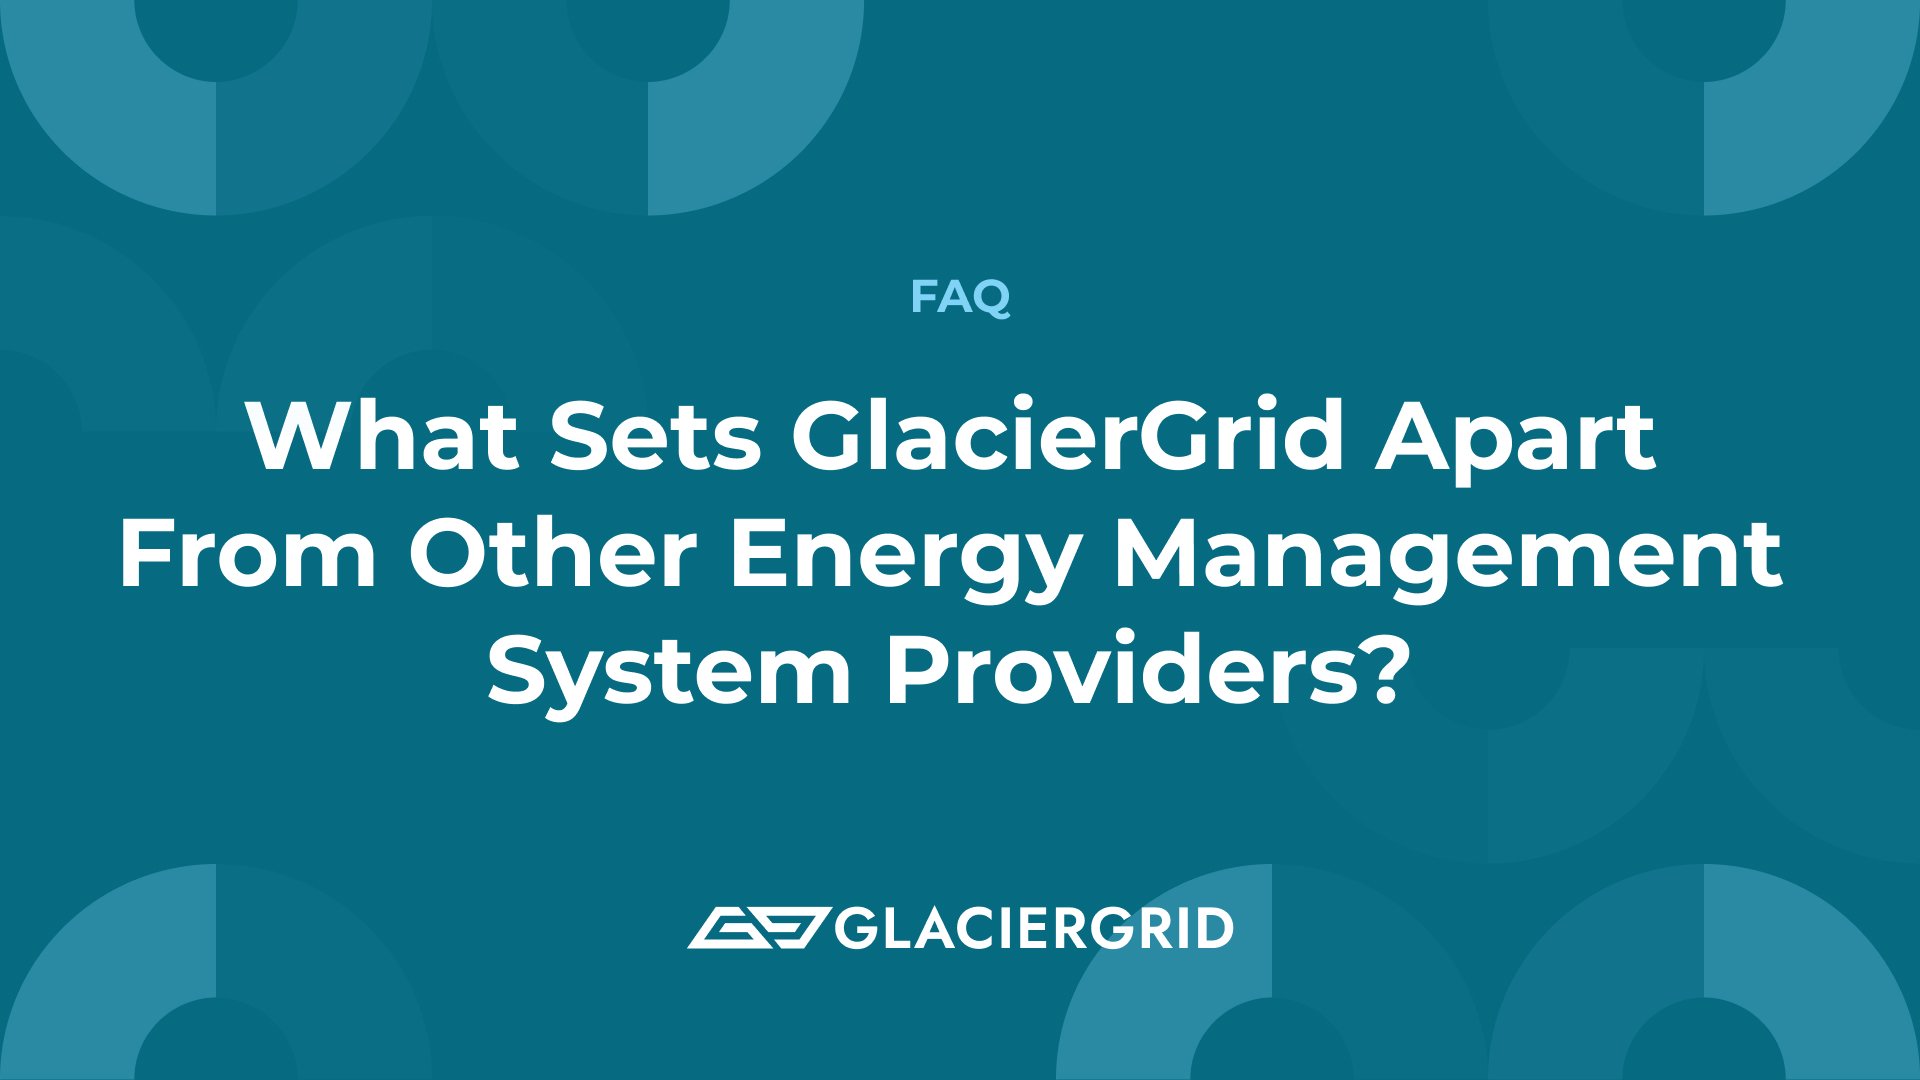 What Sets GlacierGrid Apart From Other Energy Management System Providers?